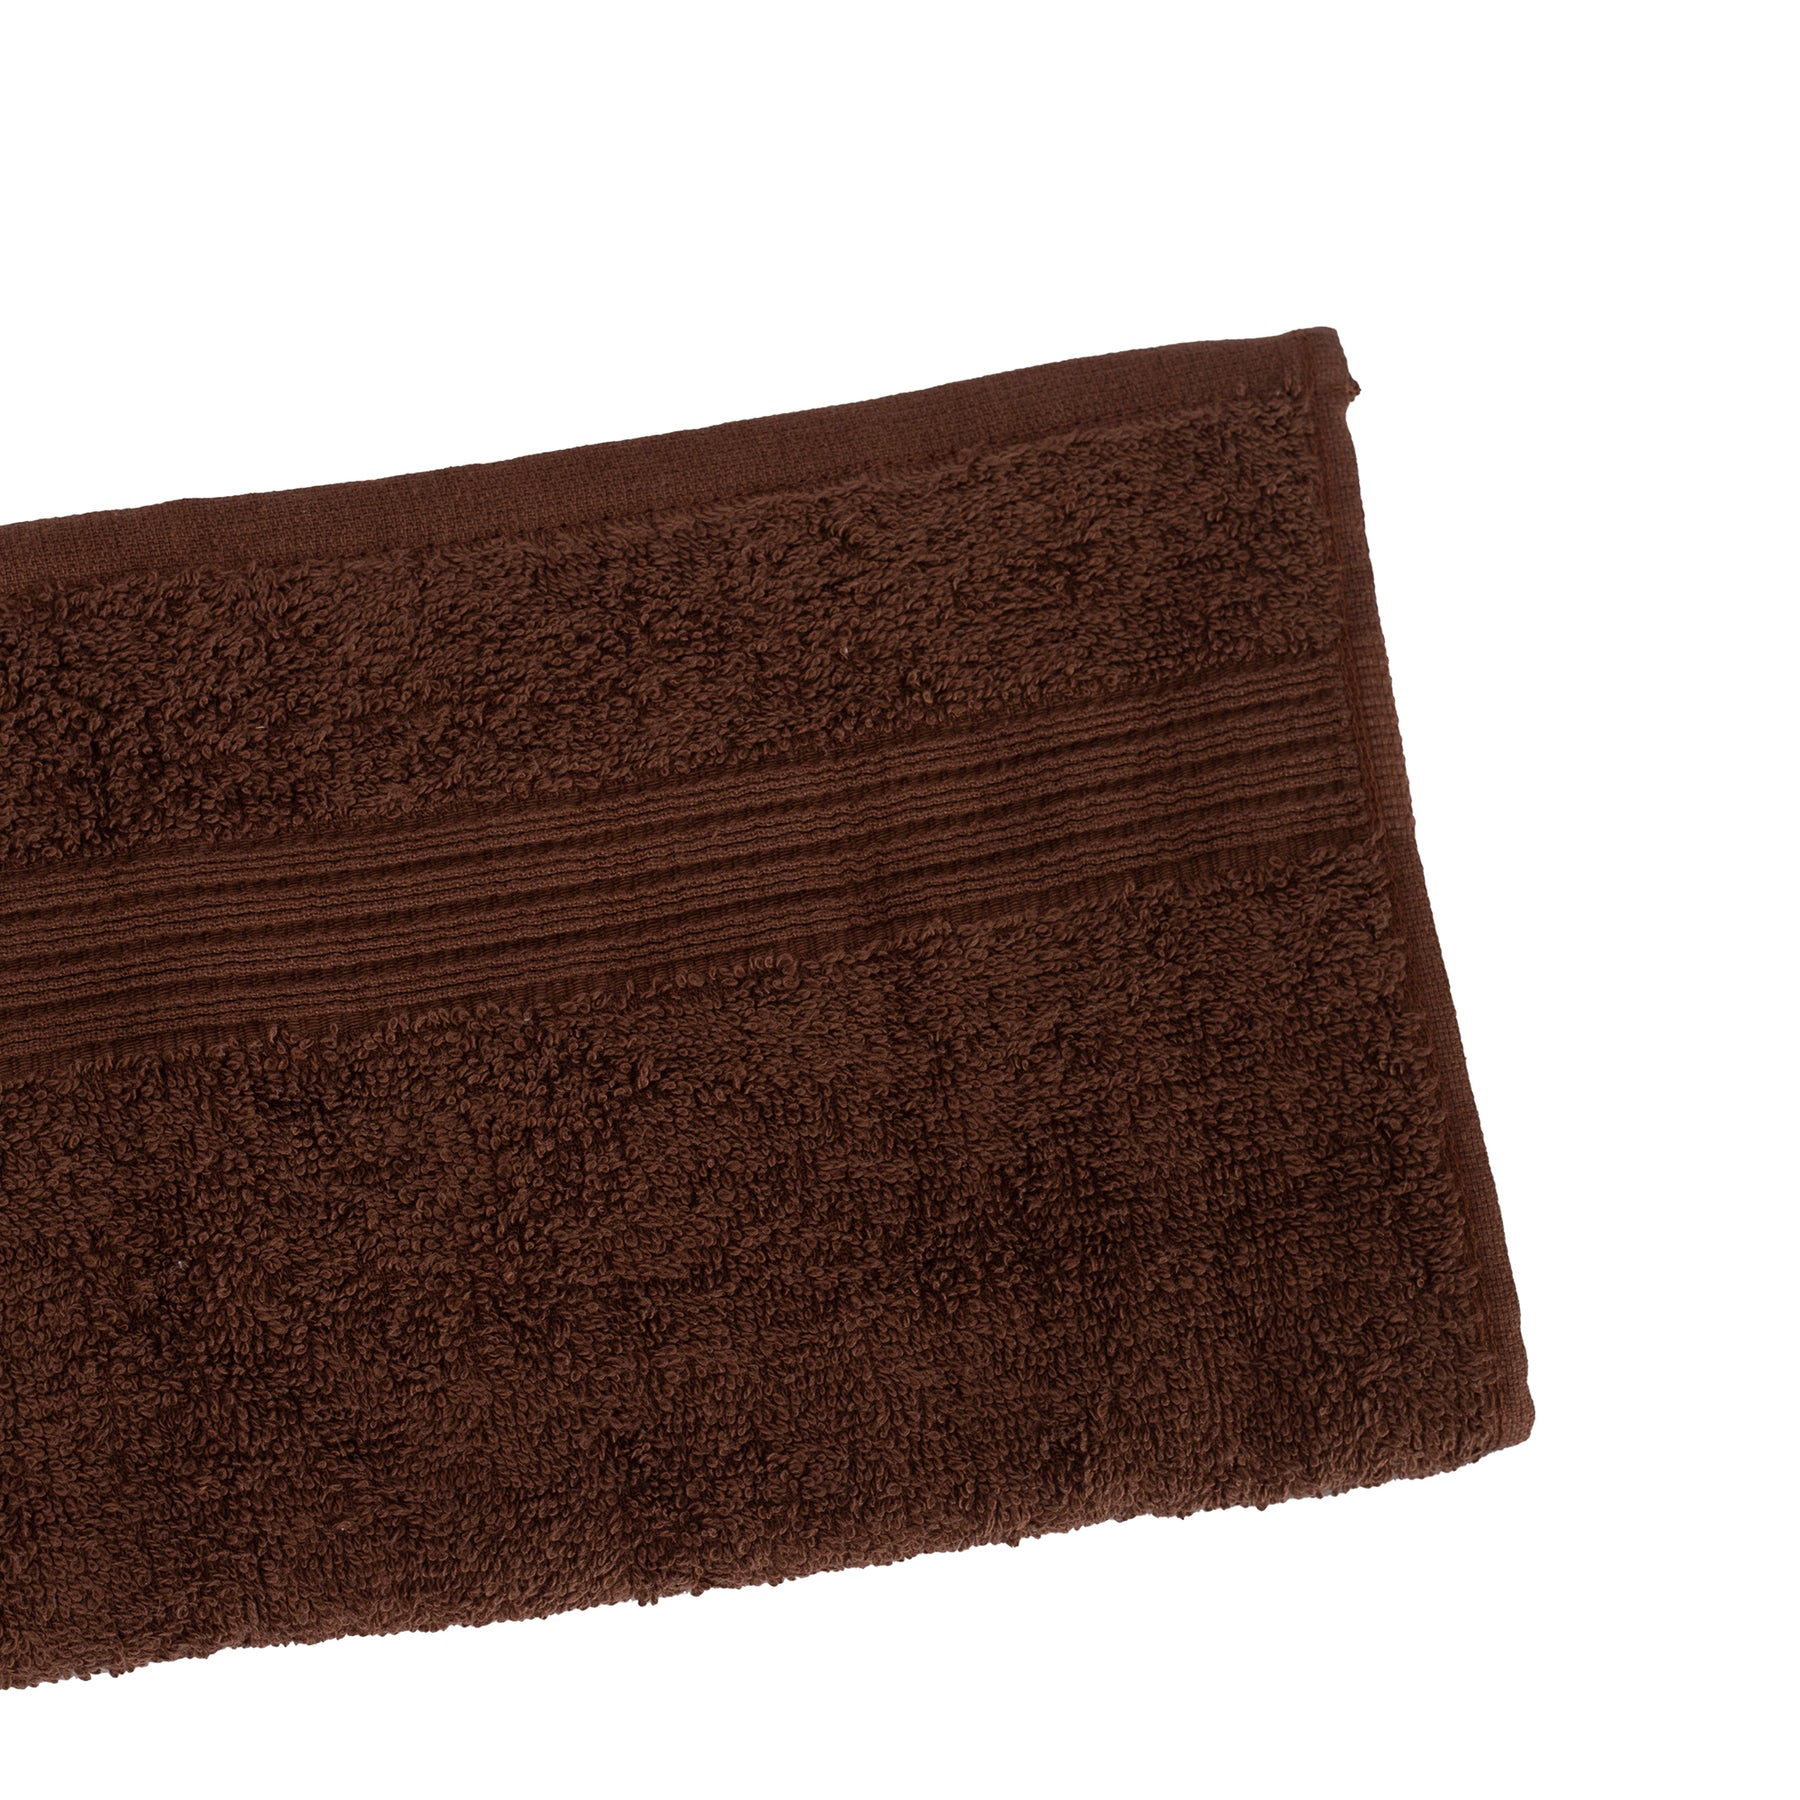 Jeneth Ultra-soft and highly absorbant Cocoa Brown Towel Set